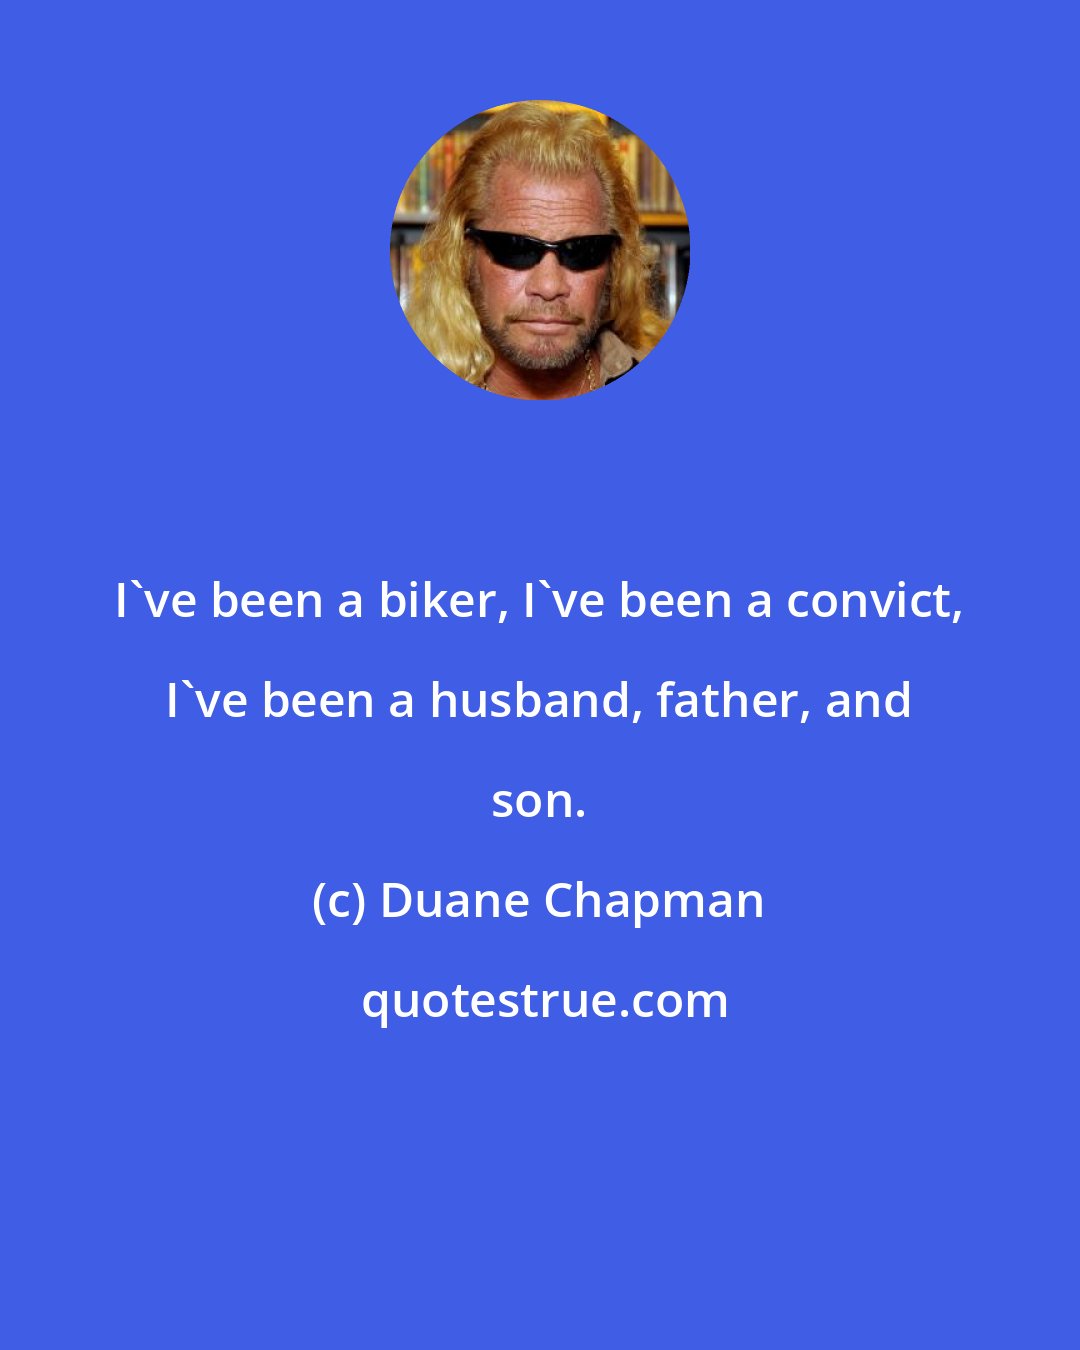 Duane Chapman: I've been a biker, I've been a convict, I've been a husband, father, and son.